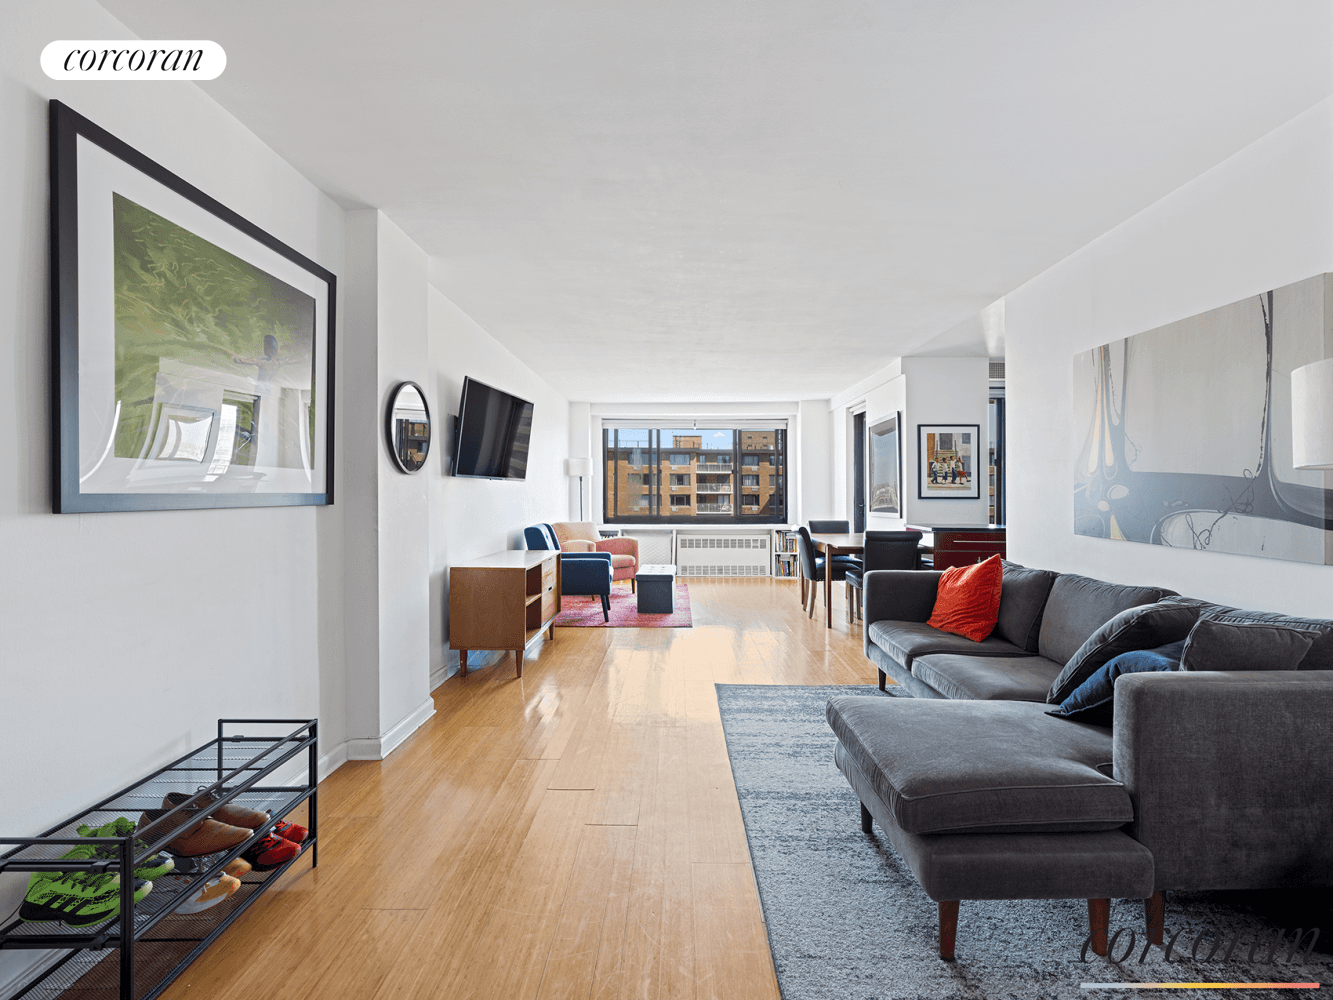 This spacious Willoughby Walk Coop apartment is one of the most converted one bedroom lines with panoramic views in flourishing Clinton Hill.